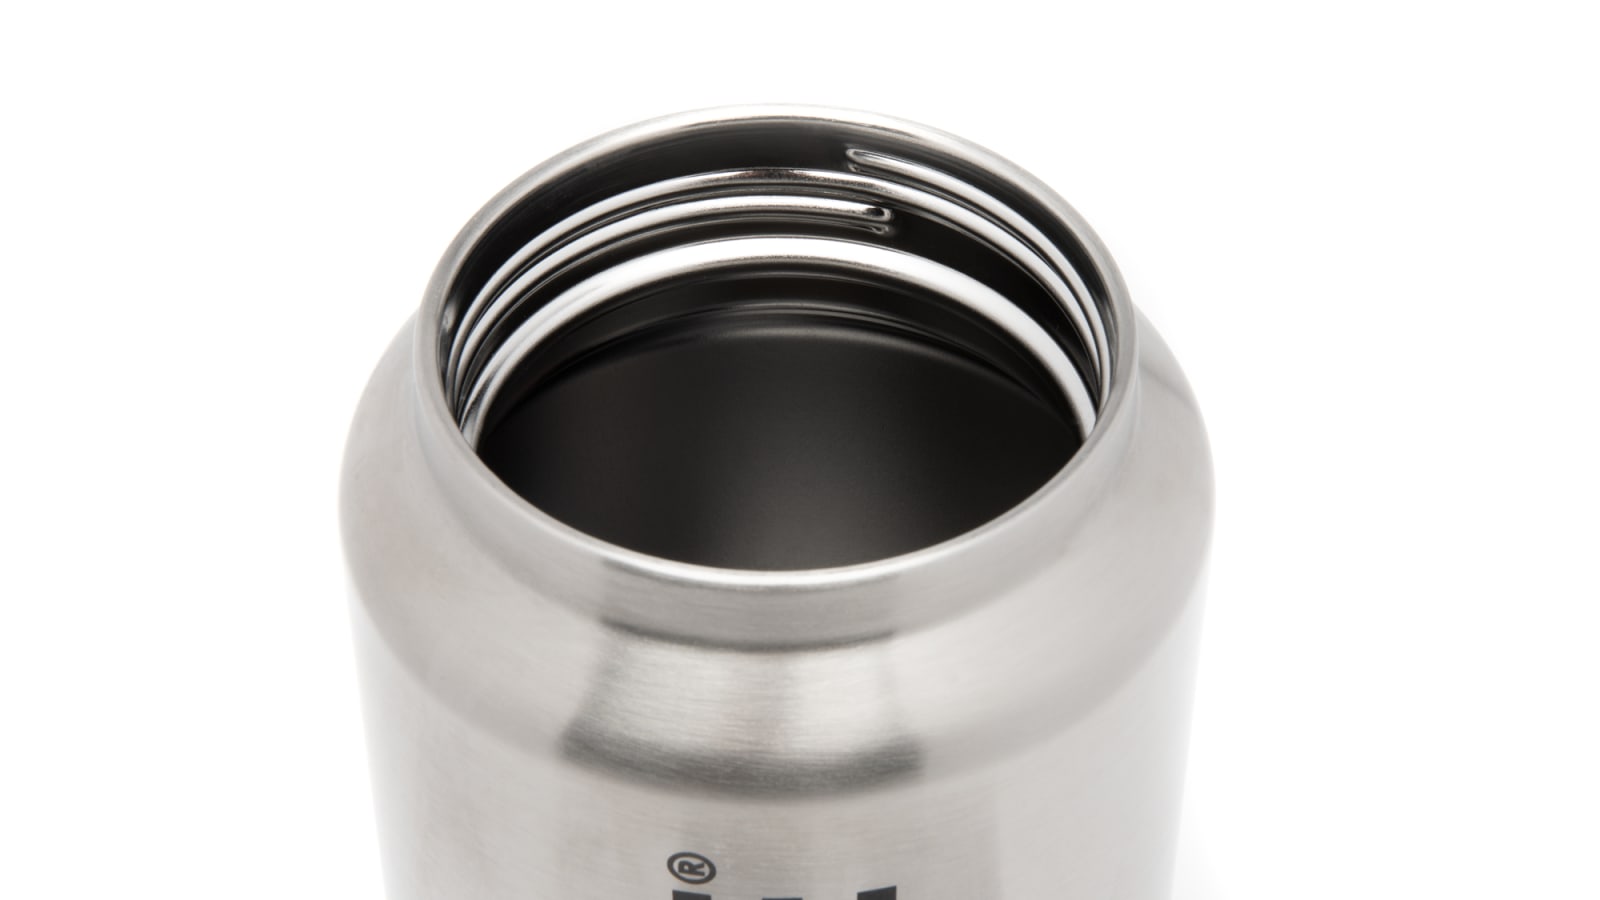 Rogue BlenderBottle Radian Insulated Stainless Steel - White